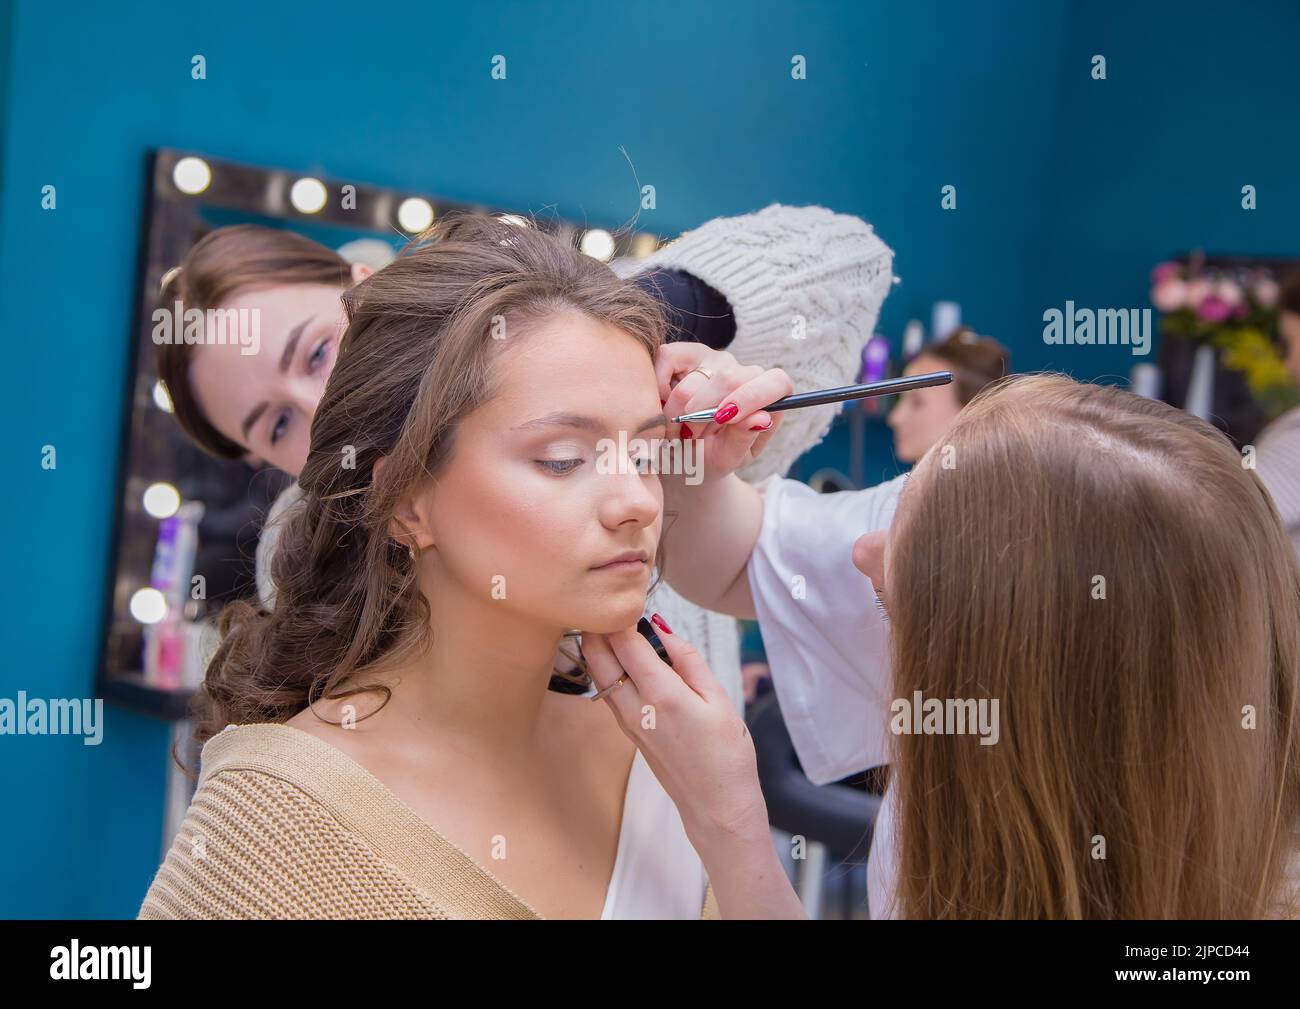 Two masters carefully do makeup and hair for a girl in the salon. Make-up artist and hairdresser create an image of a young woman. Business concept - beauty salon, facial skin and hair care. Stock Photo